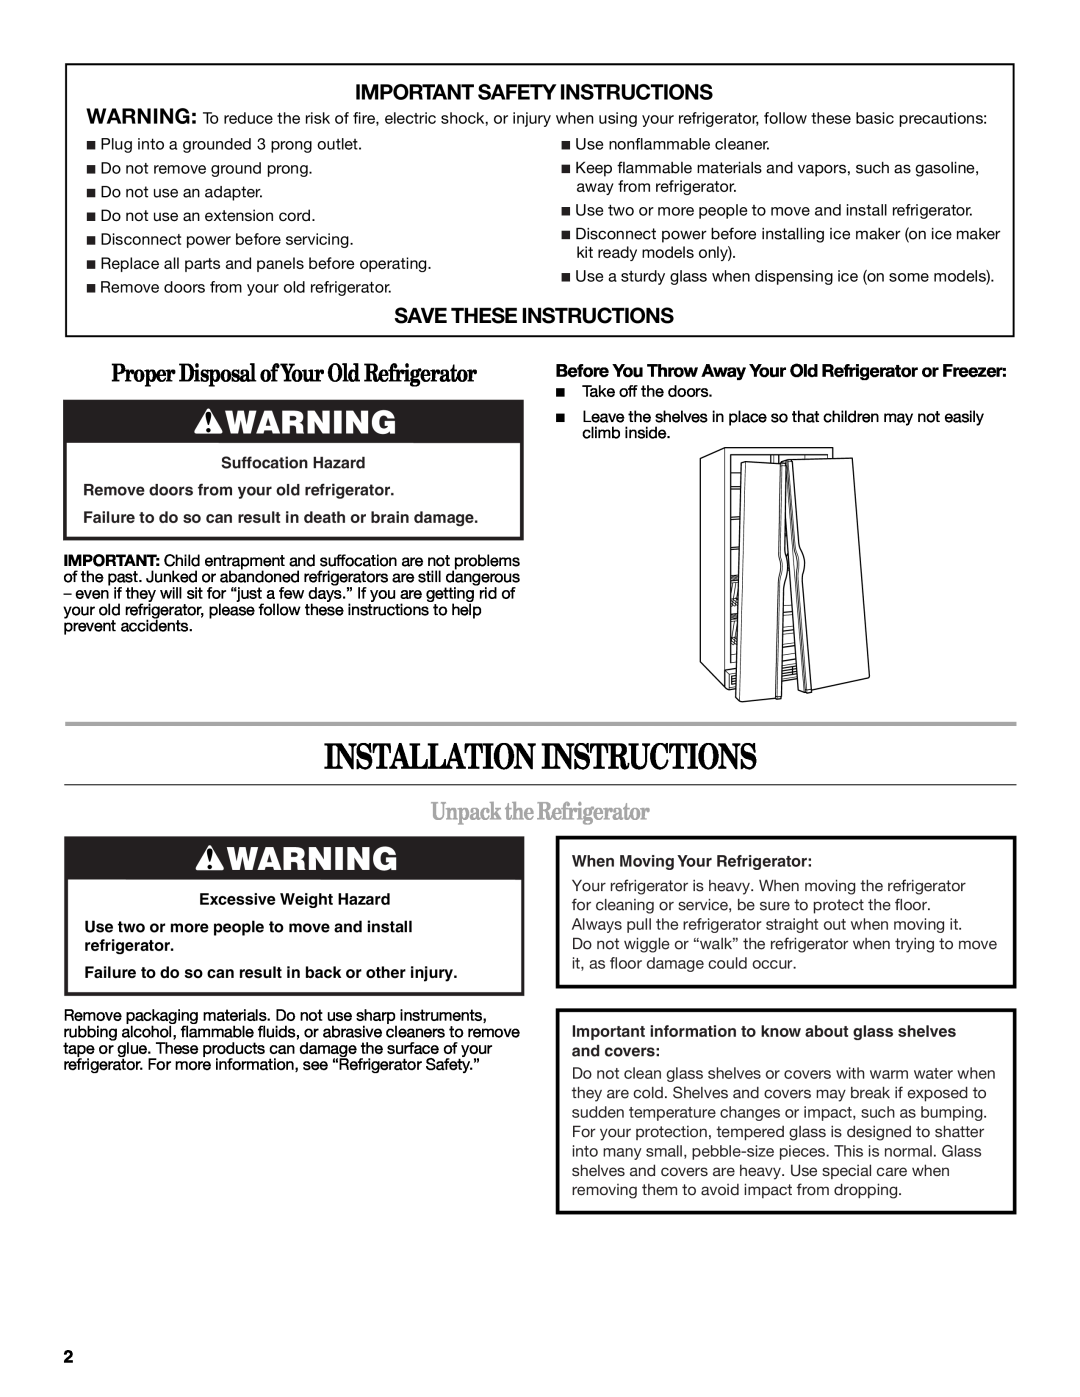 Whirlpool W10162459A Installation Instructions, Unpack the Refrigerator, Important Safety Instructions, Suffocation Hazard 